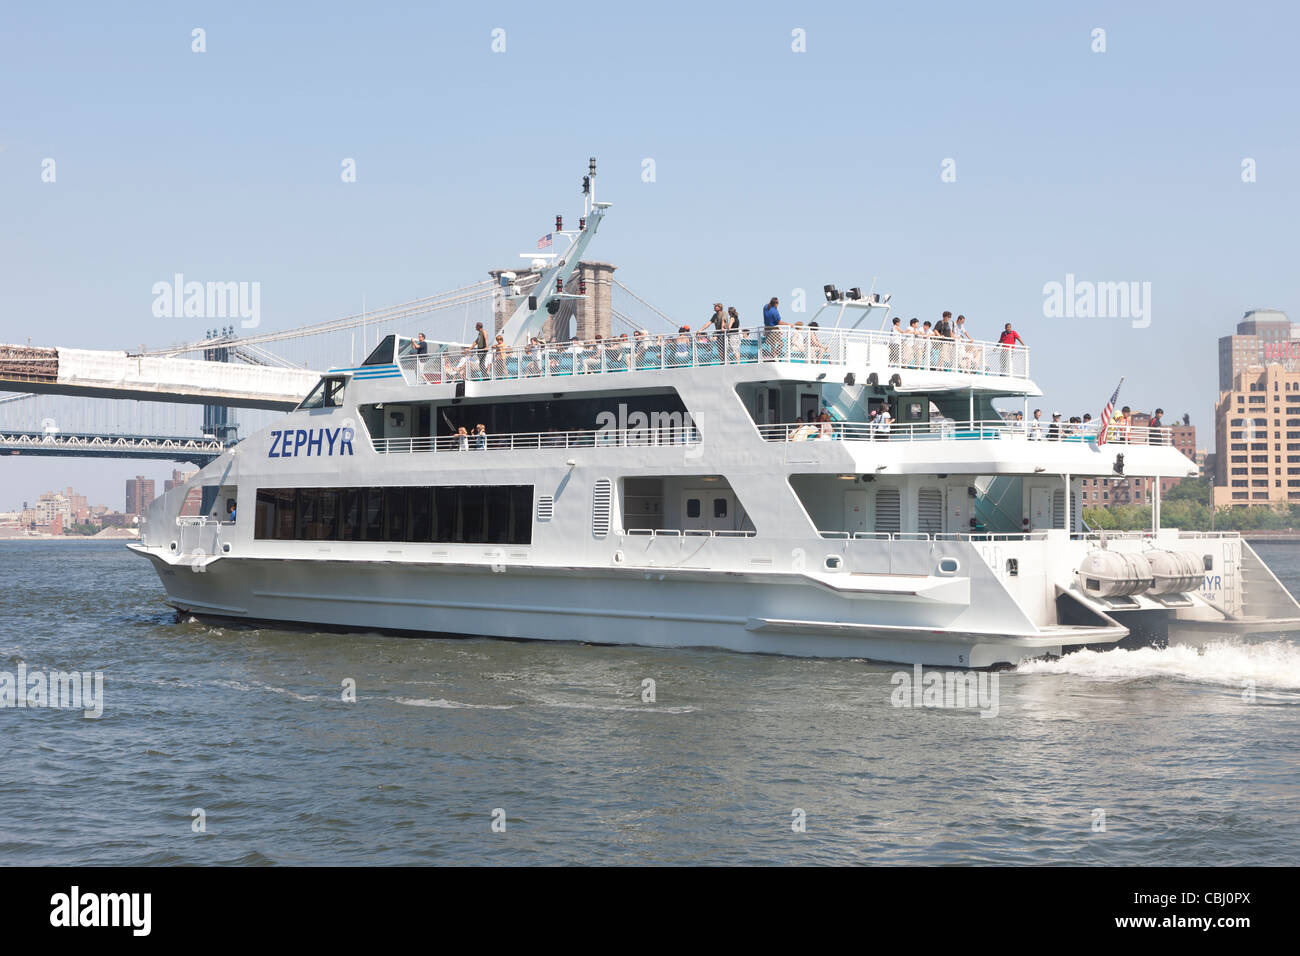 The Circle Line Zephyr departs South Street Seaport Pier 16 with a load of passengers in New York City. Stock Photo